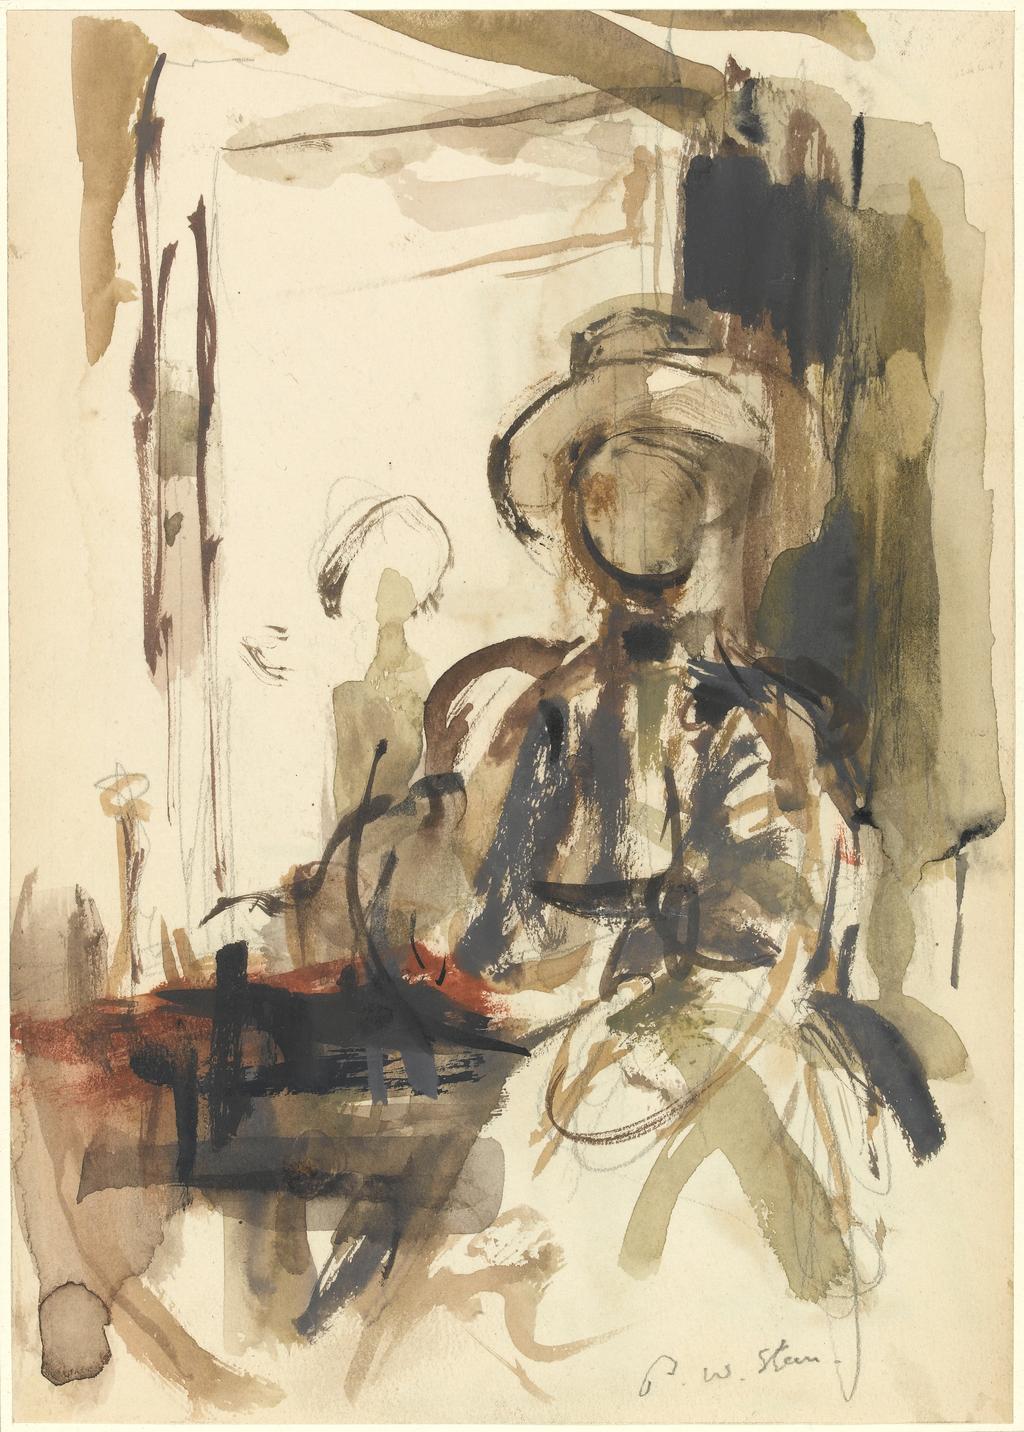 An image of Seated figure: woman seated, wearing a hat. A slight landscape sketch showing a bridge across a river and wharves (the Thames?). Steer, Philip Wilson (British, 1860-1942). Graphite and watercolour on paper, height 241 mm, width 171 mm.